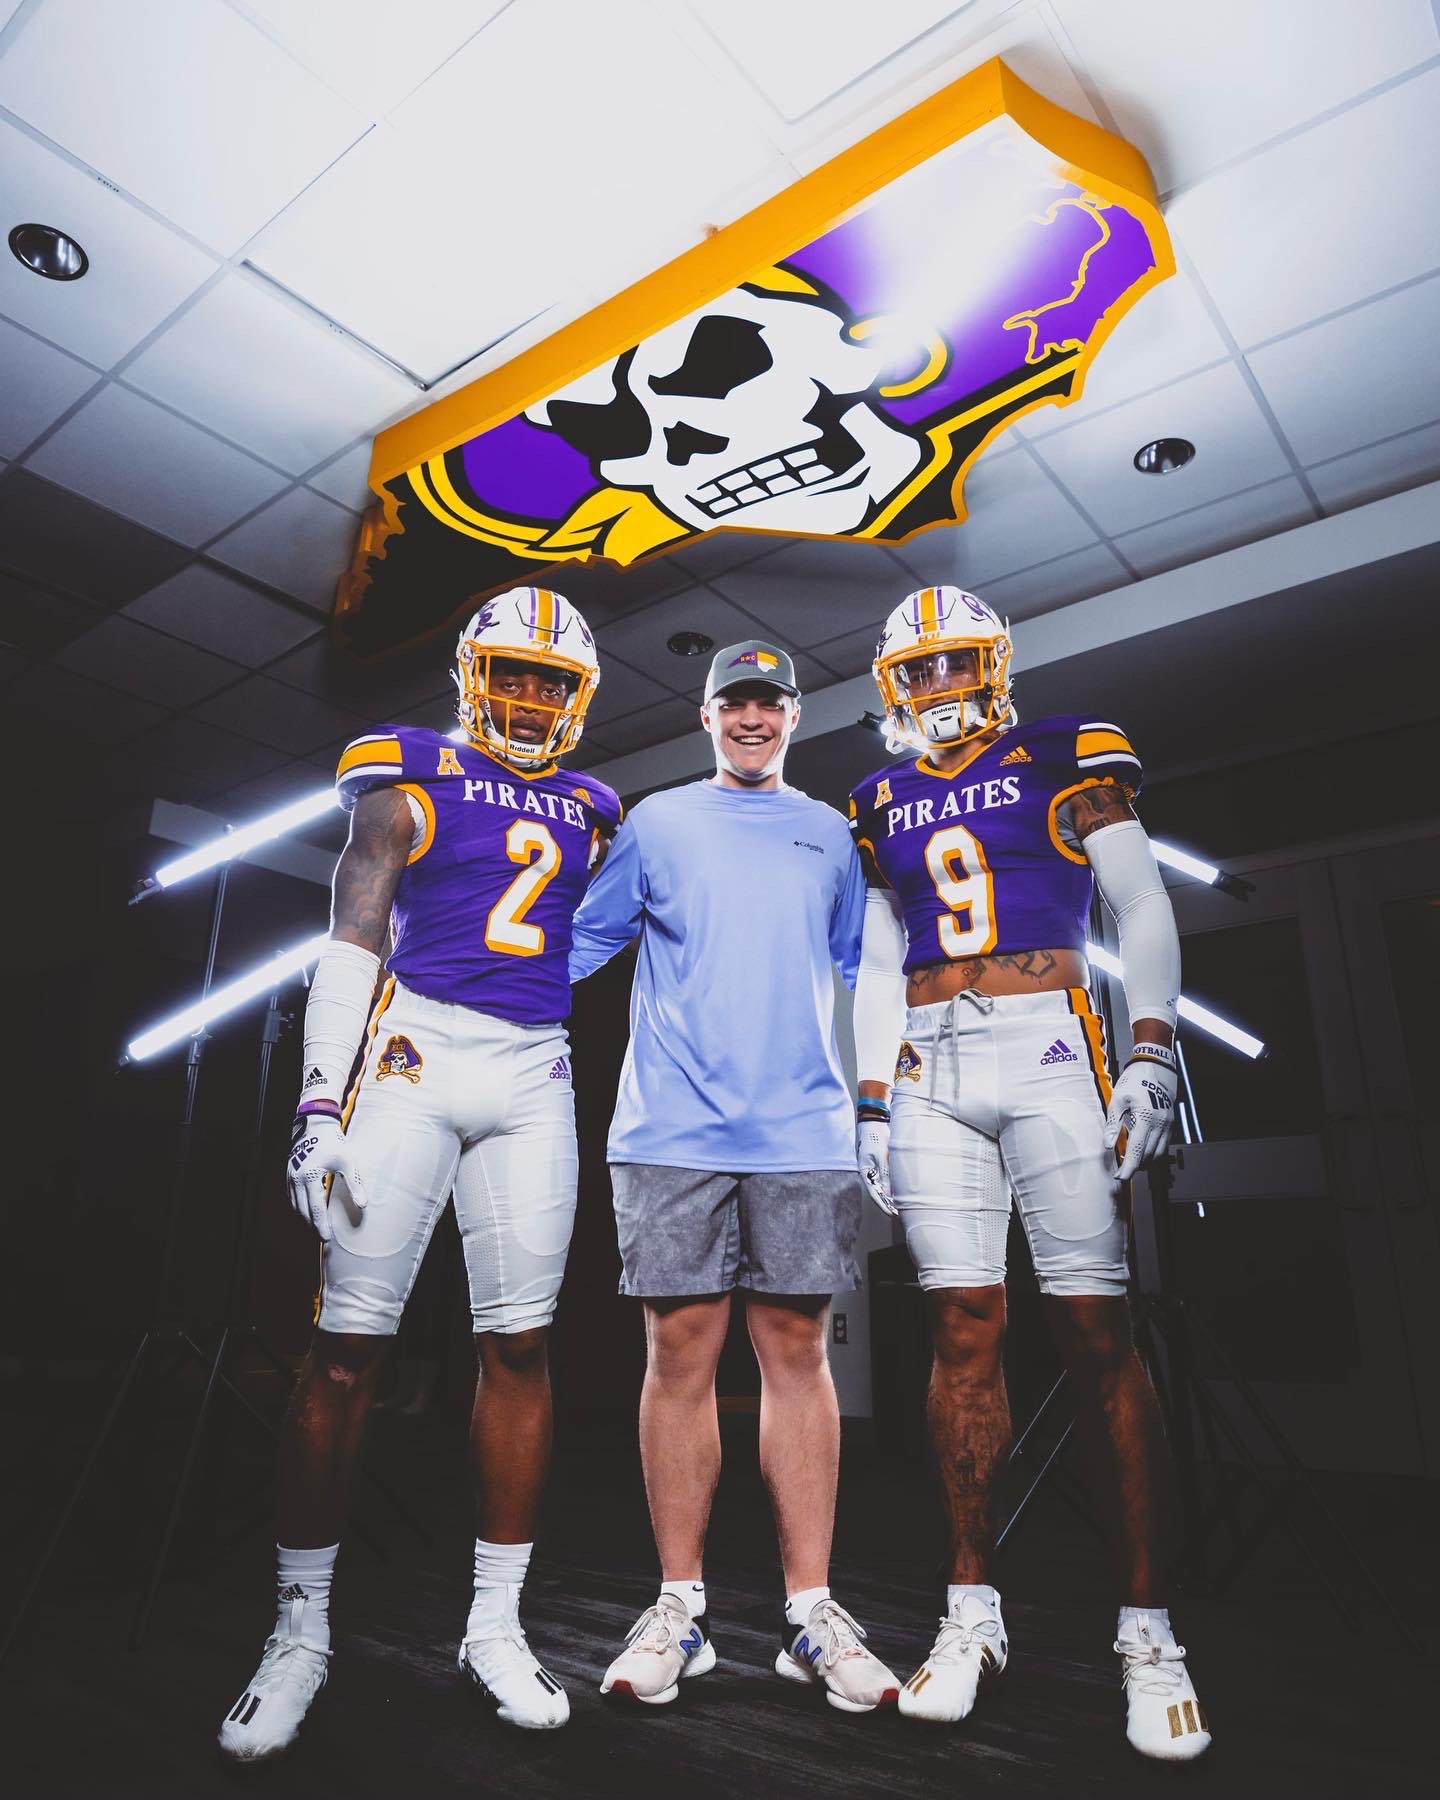 Will Treadaway on X: I am thrilled to finally be able to share my 2022 ECU  Football Uniform Design! My concept was a “Modern Throwback” Uniform! I  used elements from previous uniforms